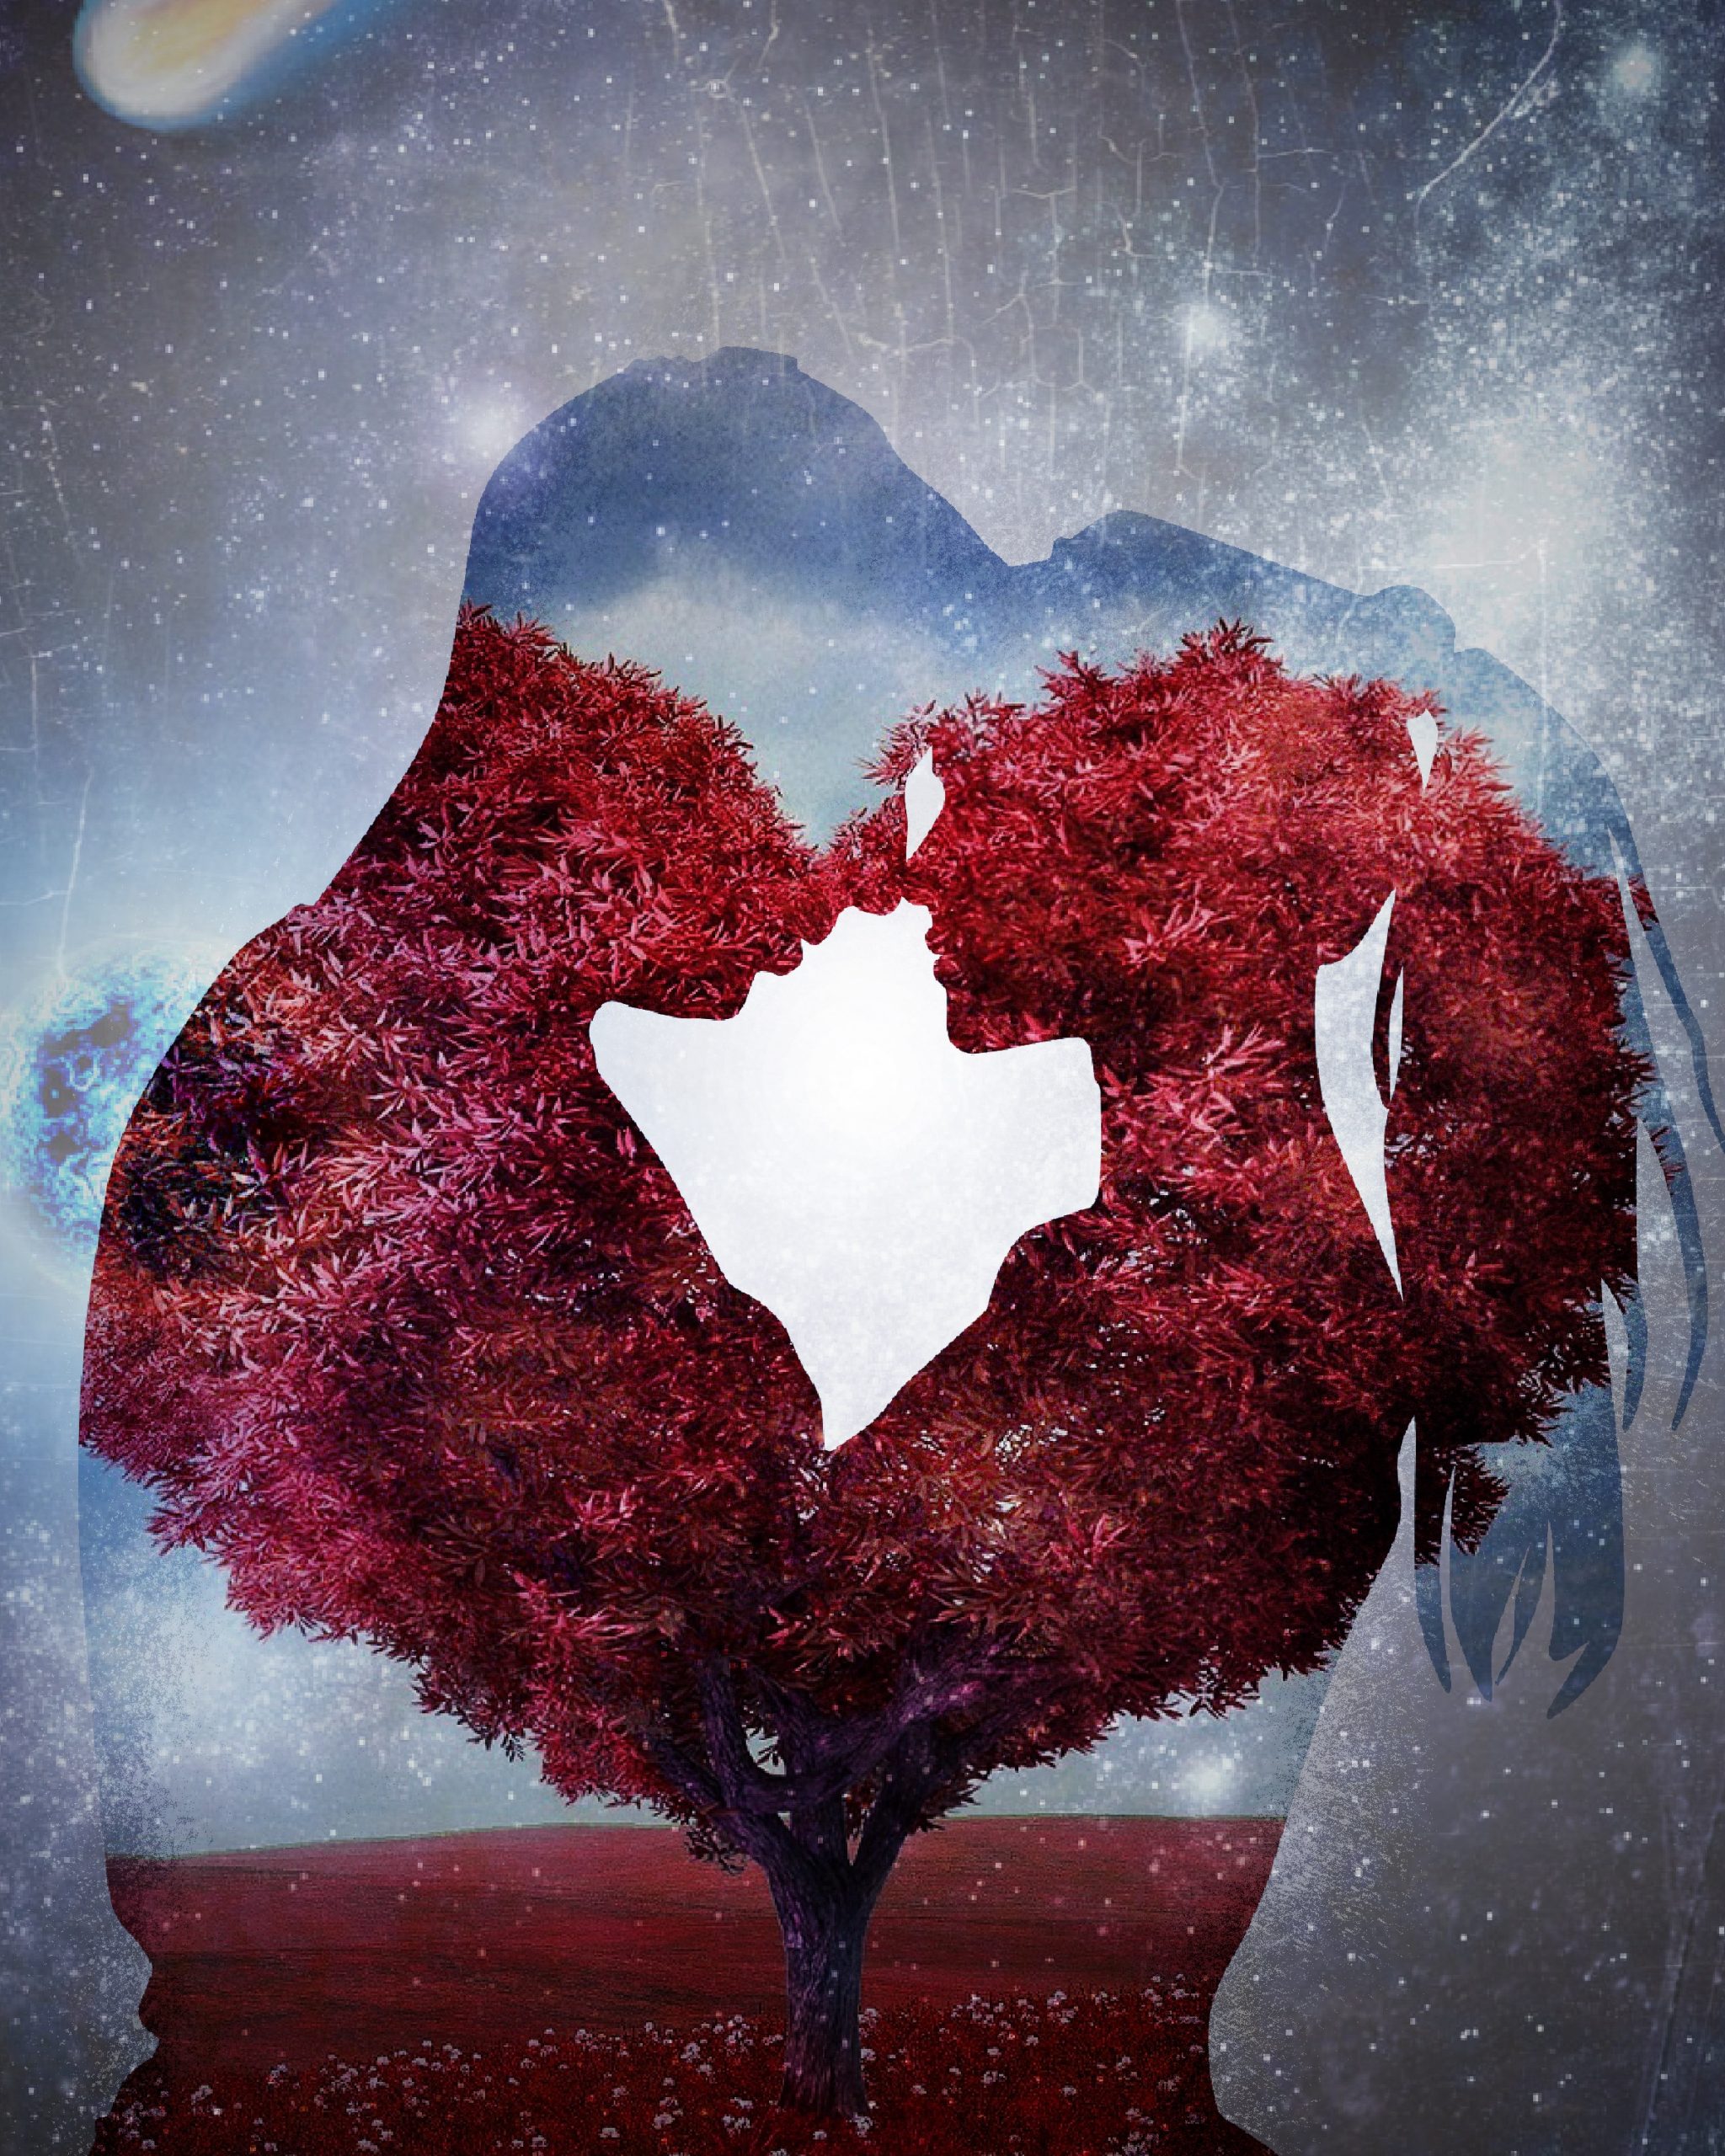 Silhouette of man and woman illustration, love, passion, romantic wallpaper